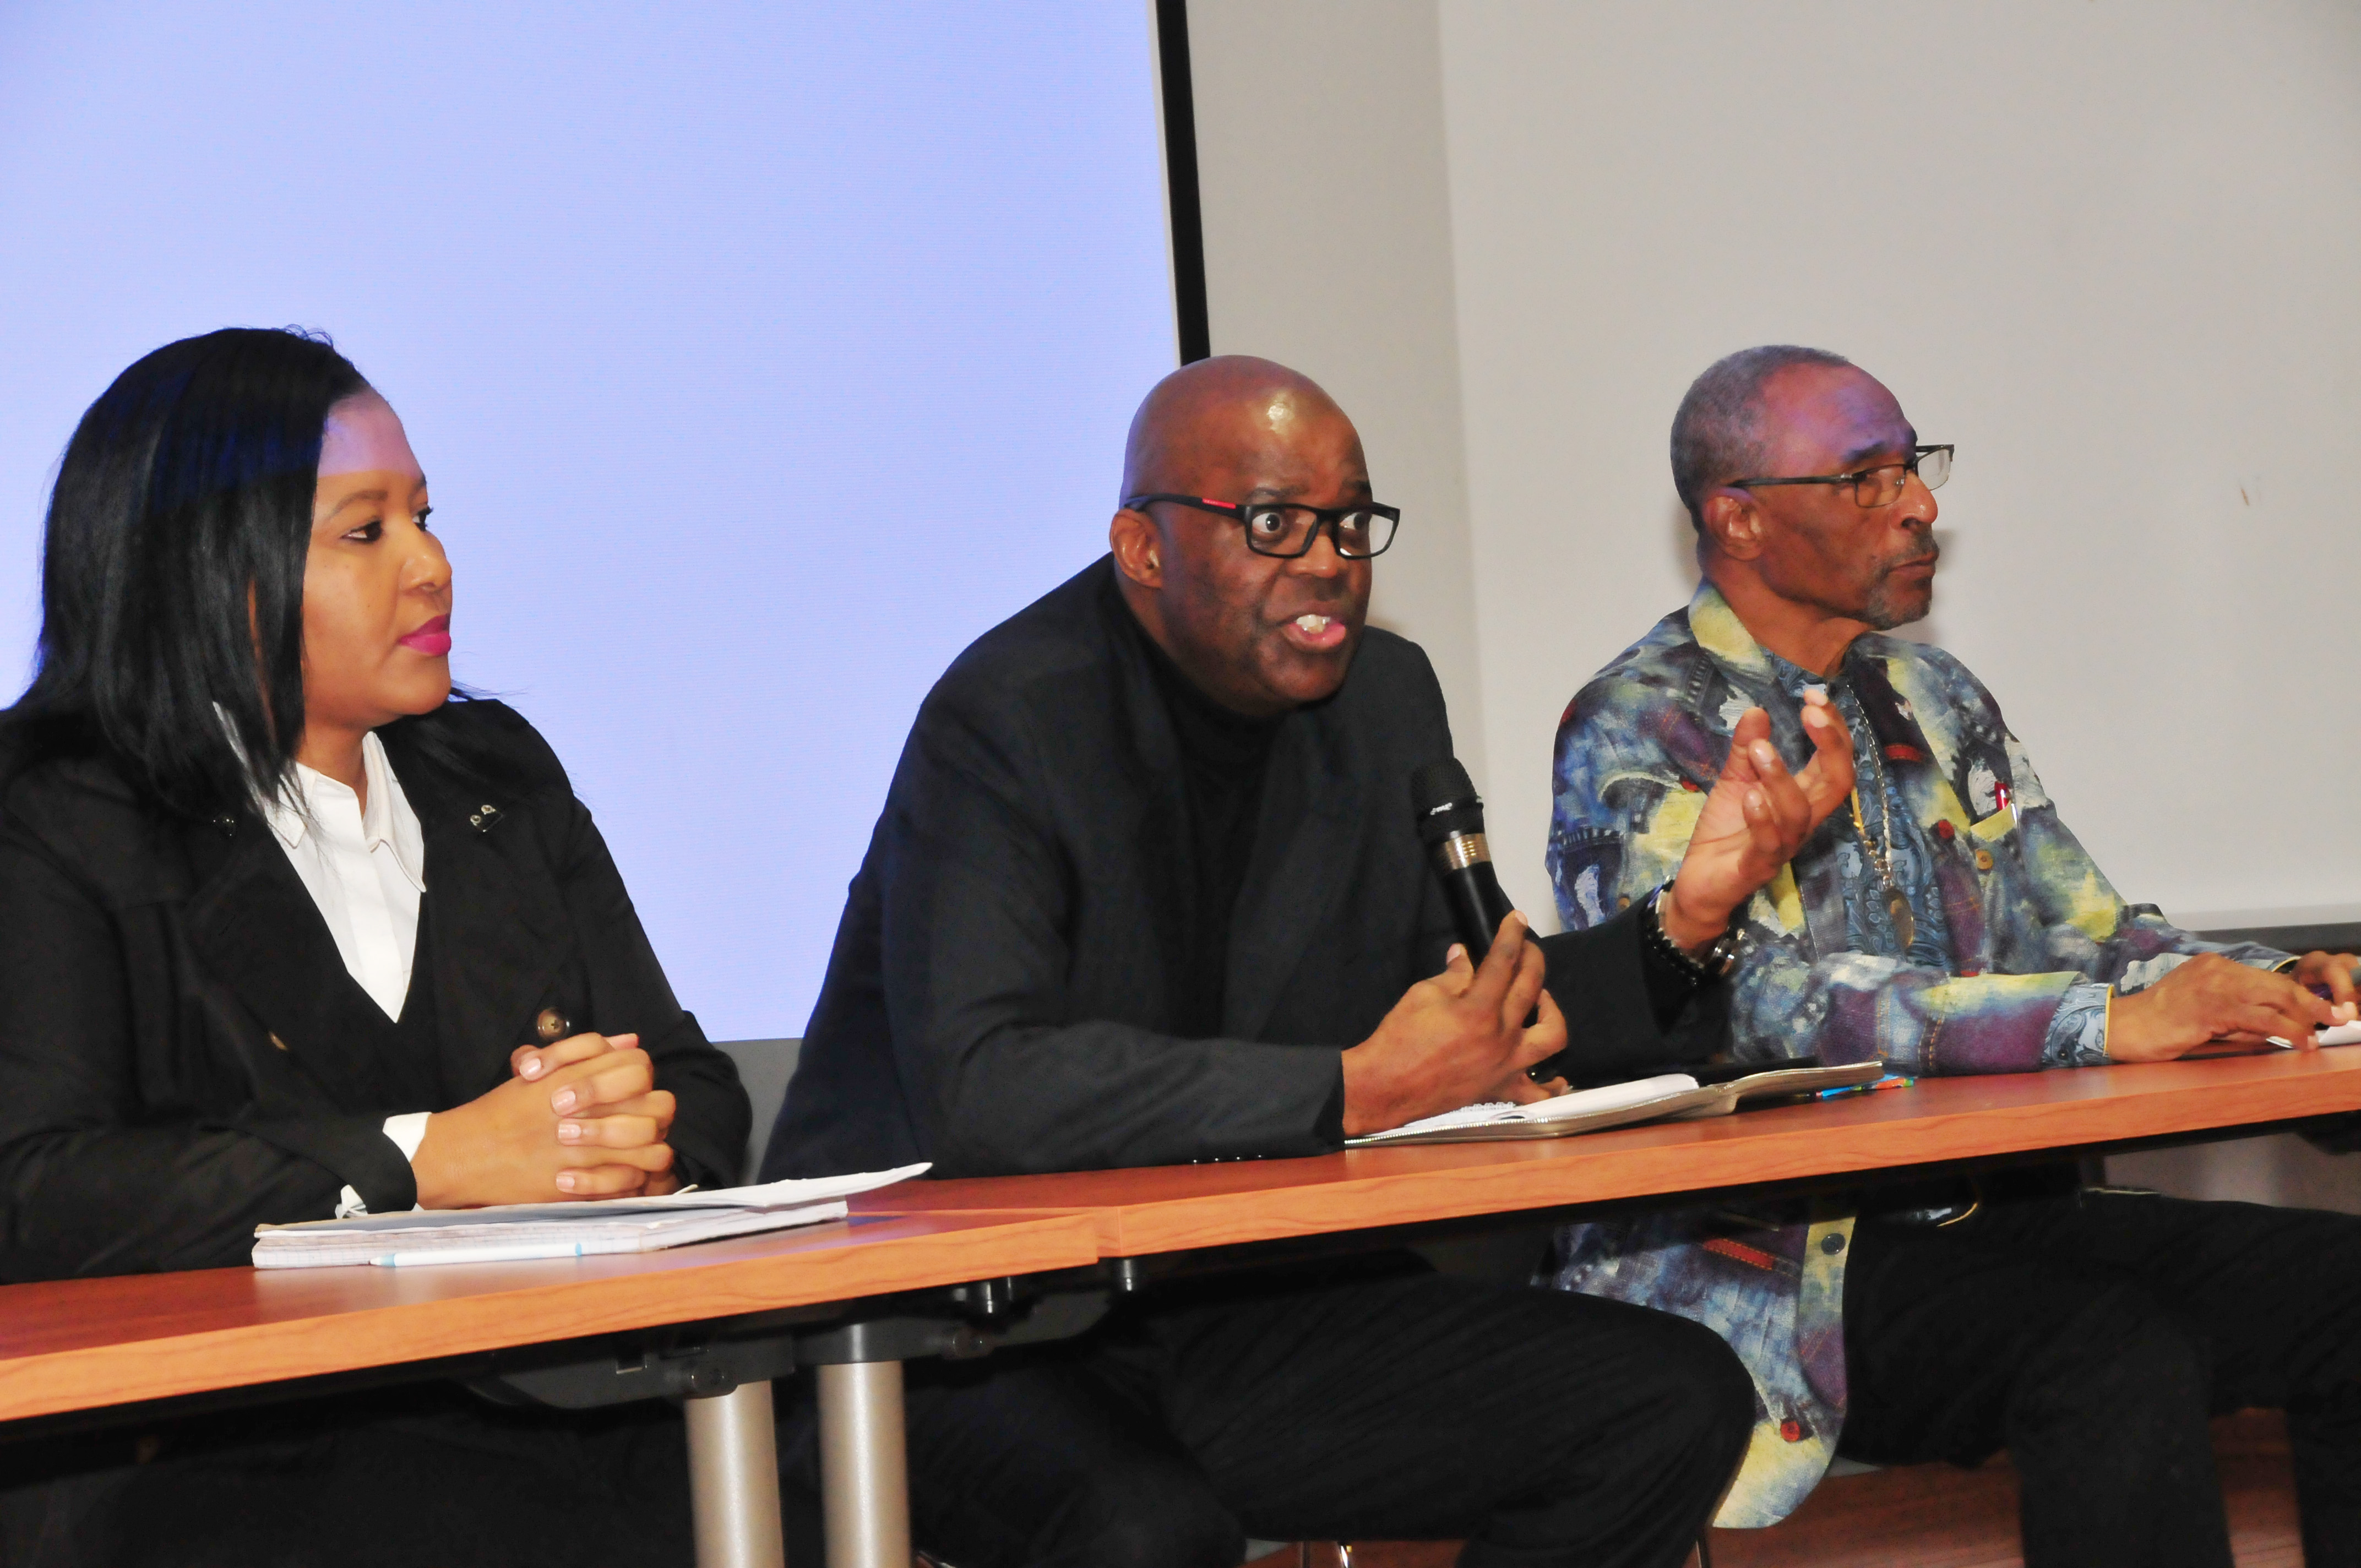 Dr. Eddy Maloka (center), CEO of the African Peer Review Mechanism, fields a question from the audience of DSU students. He is flanked by Tumi Dlamini (l), Dr. Maloka's advisor, and C. Gregory Turner, of Kool-Baker Global, a firm that invests in businesses in Africa.